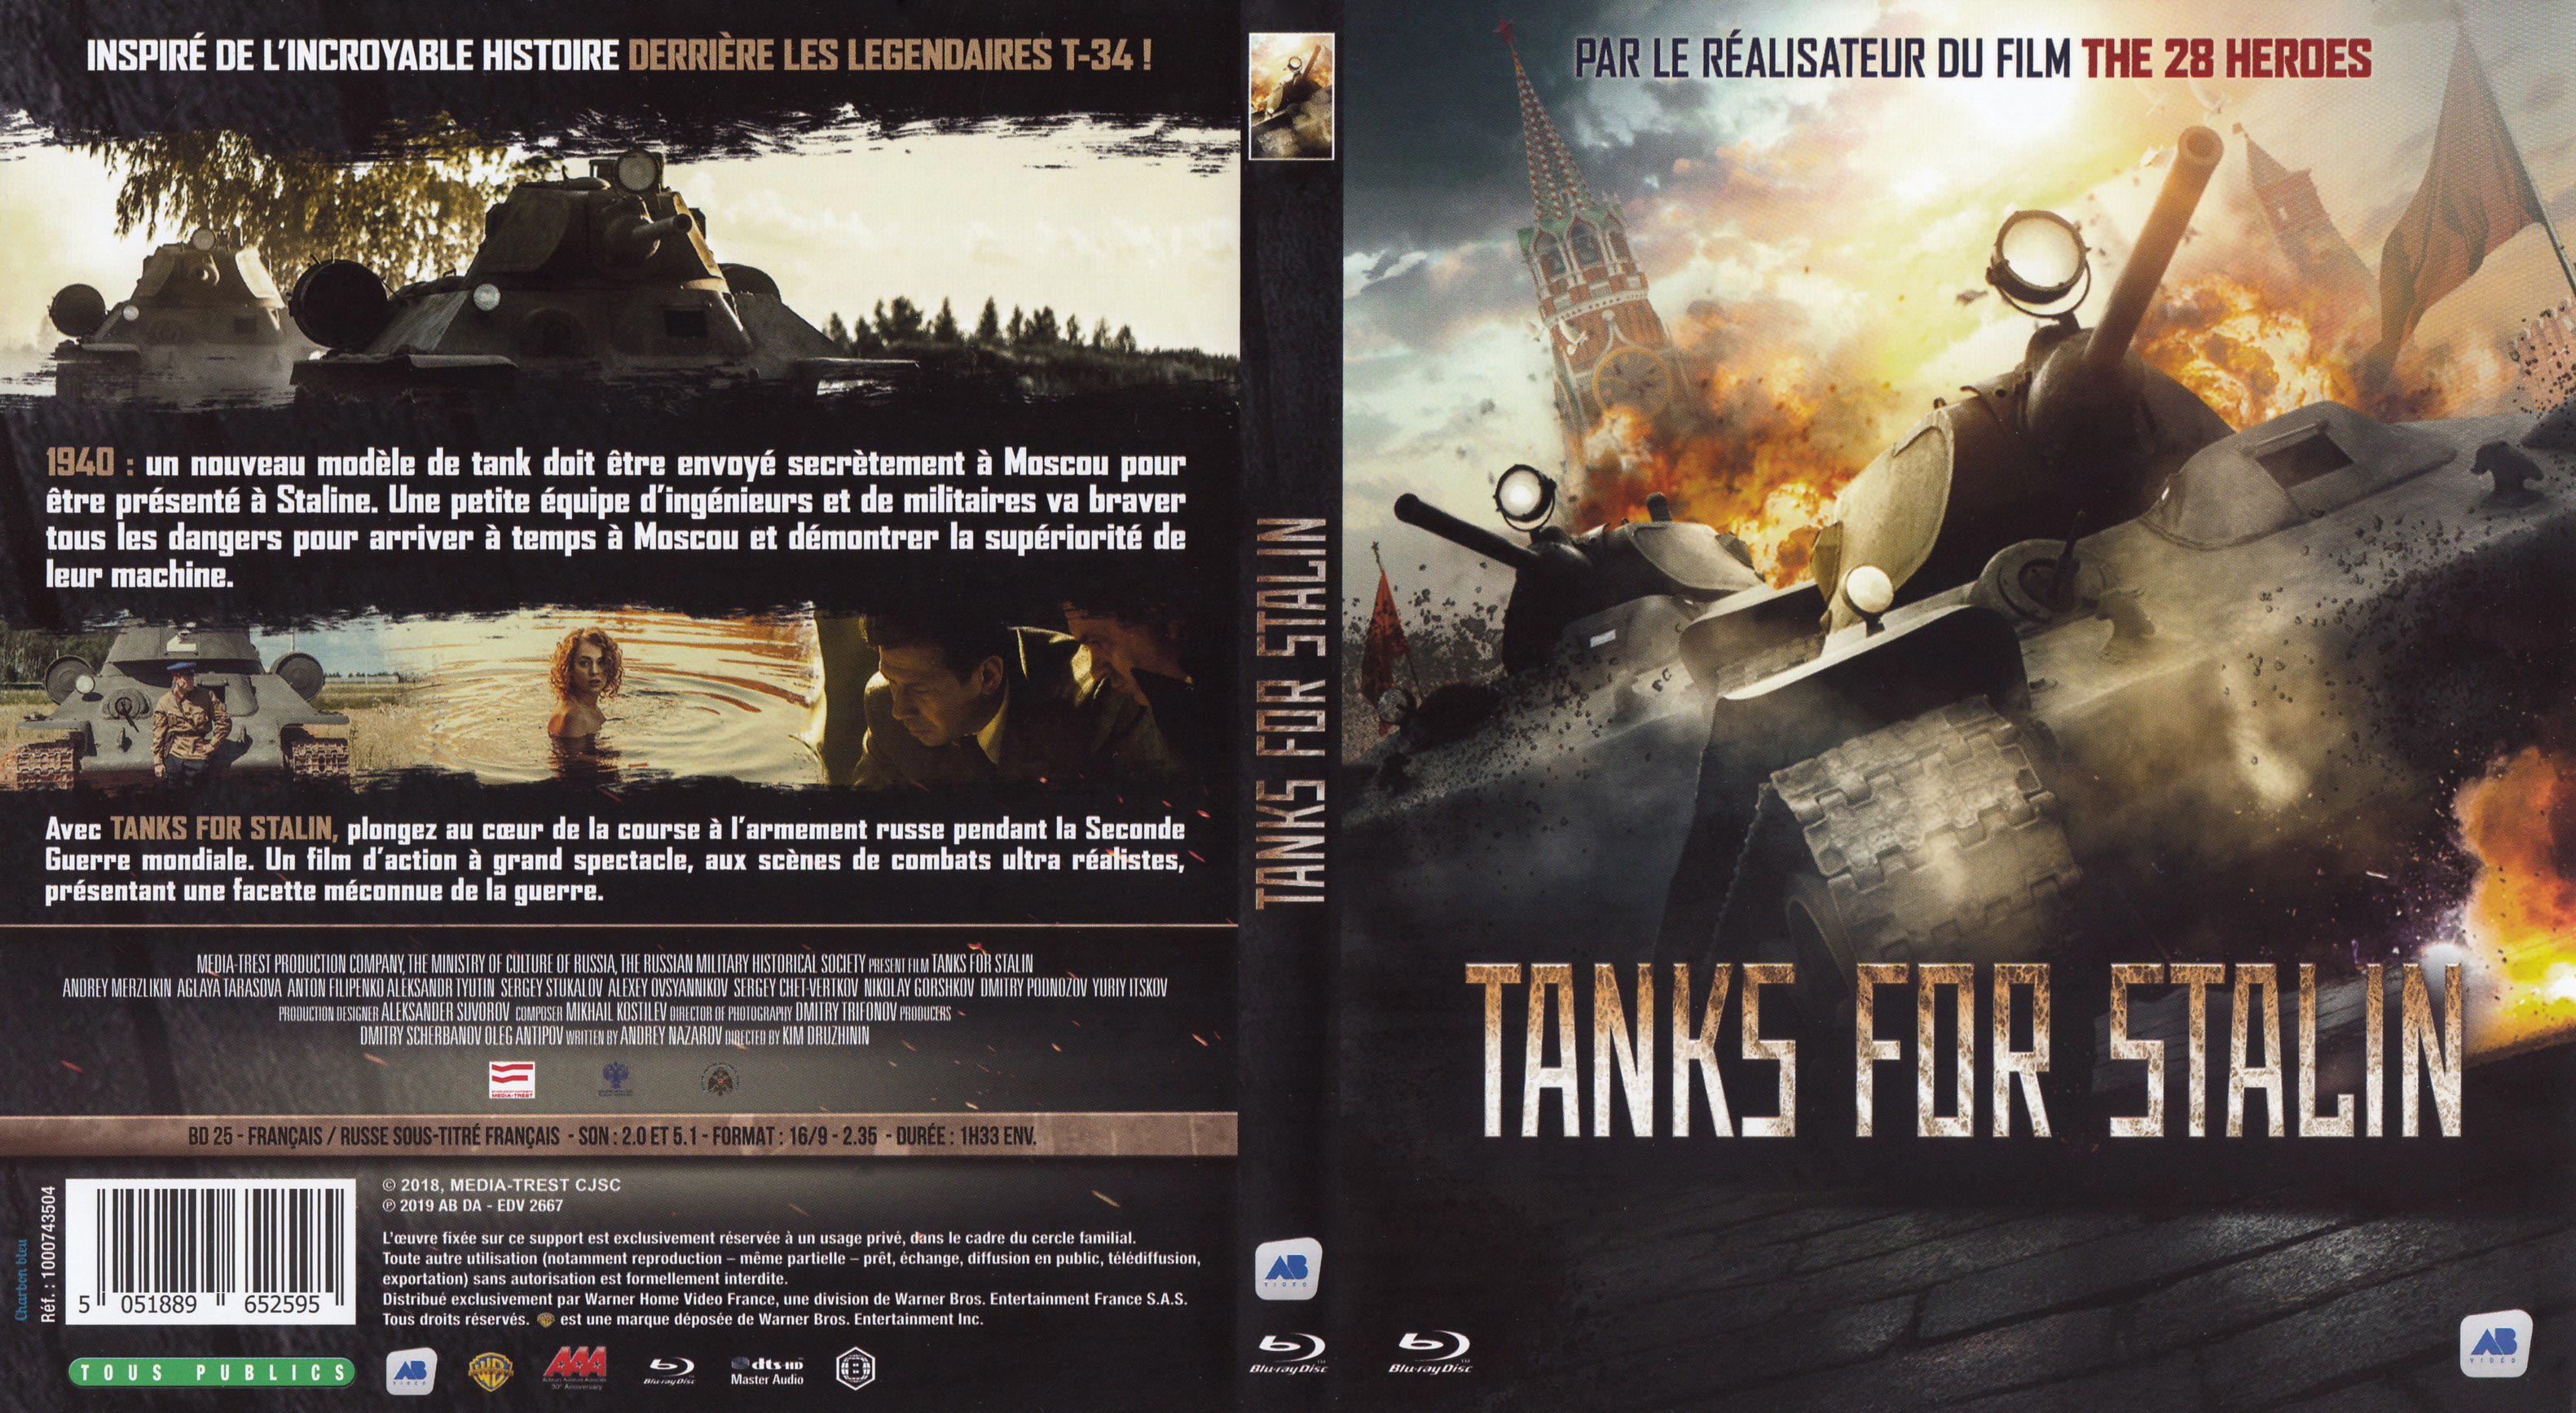 Jaquette DVD Tanks for Stalin (BLU-RAY)